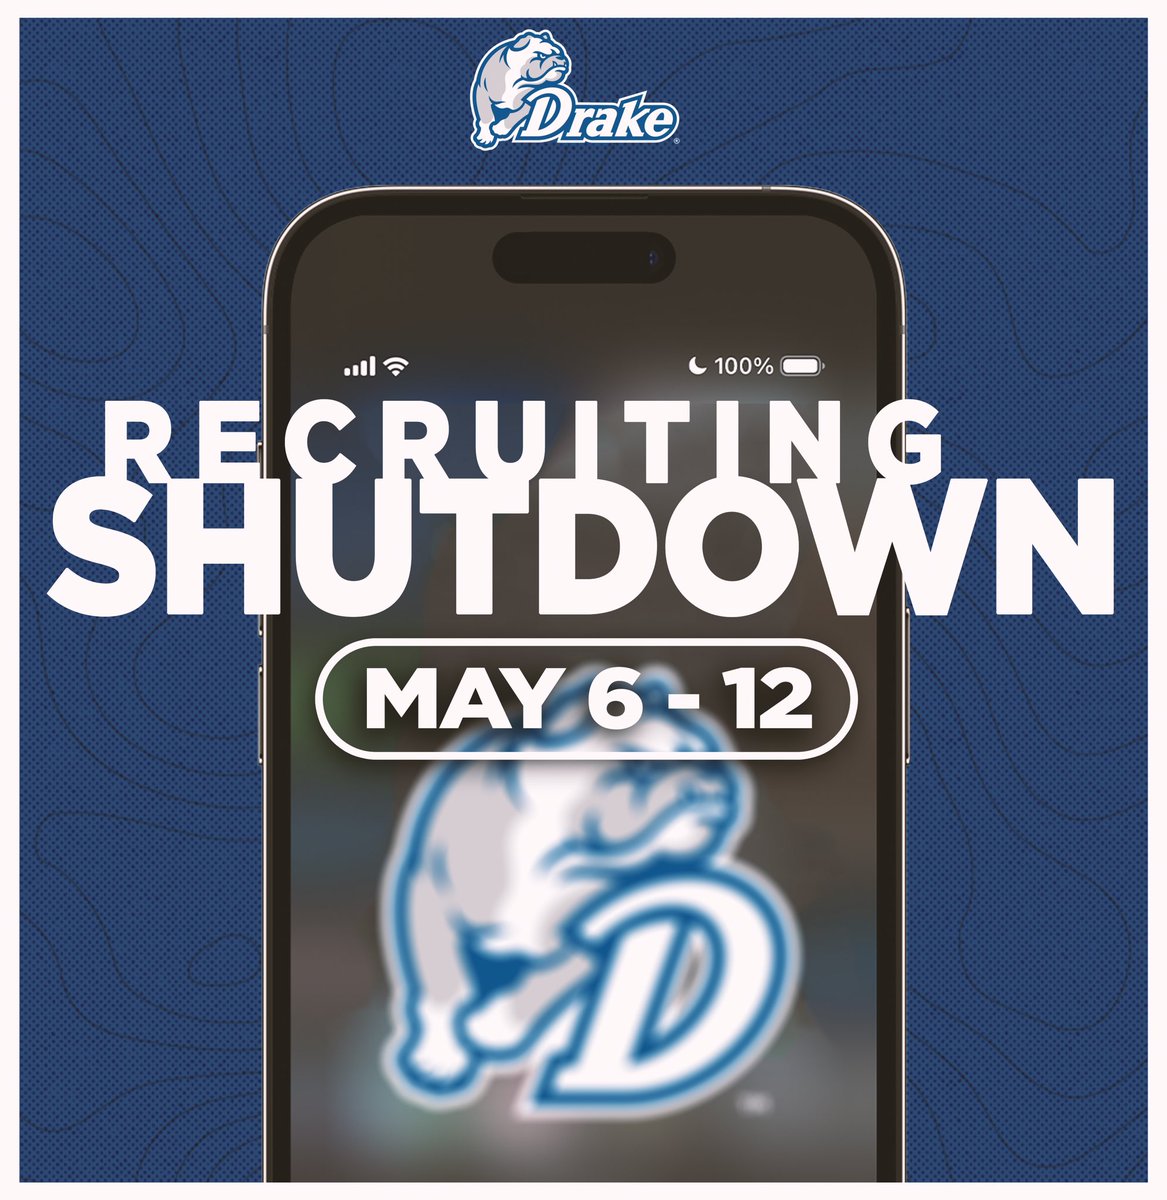 Hitting do not disturb ✌️ We can’t wait to talk to future Bulldogs on May 13th! #BeBlue